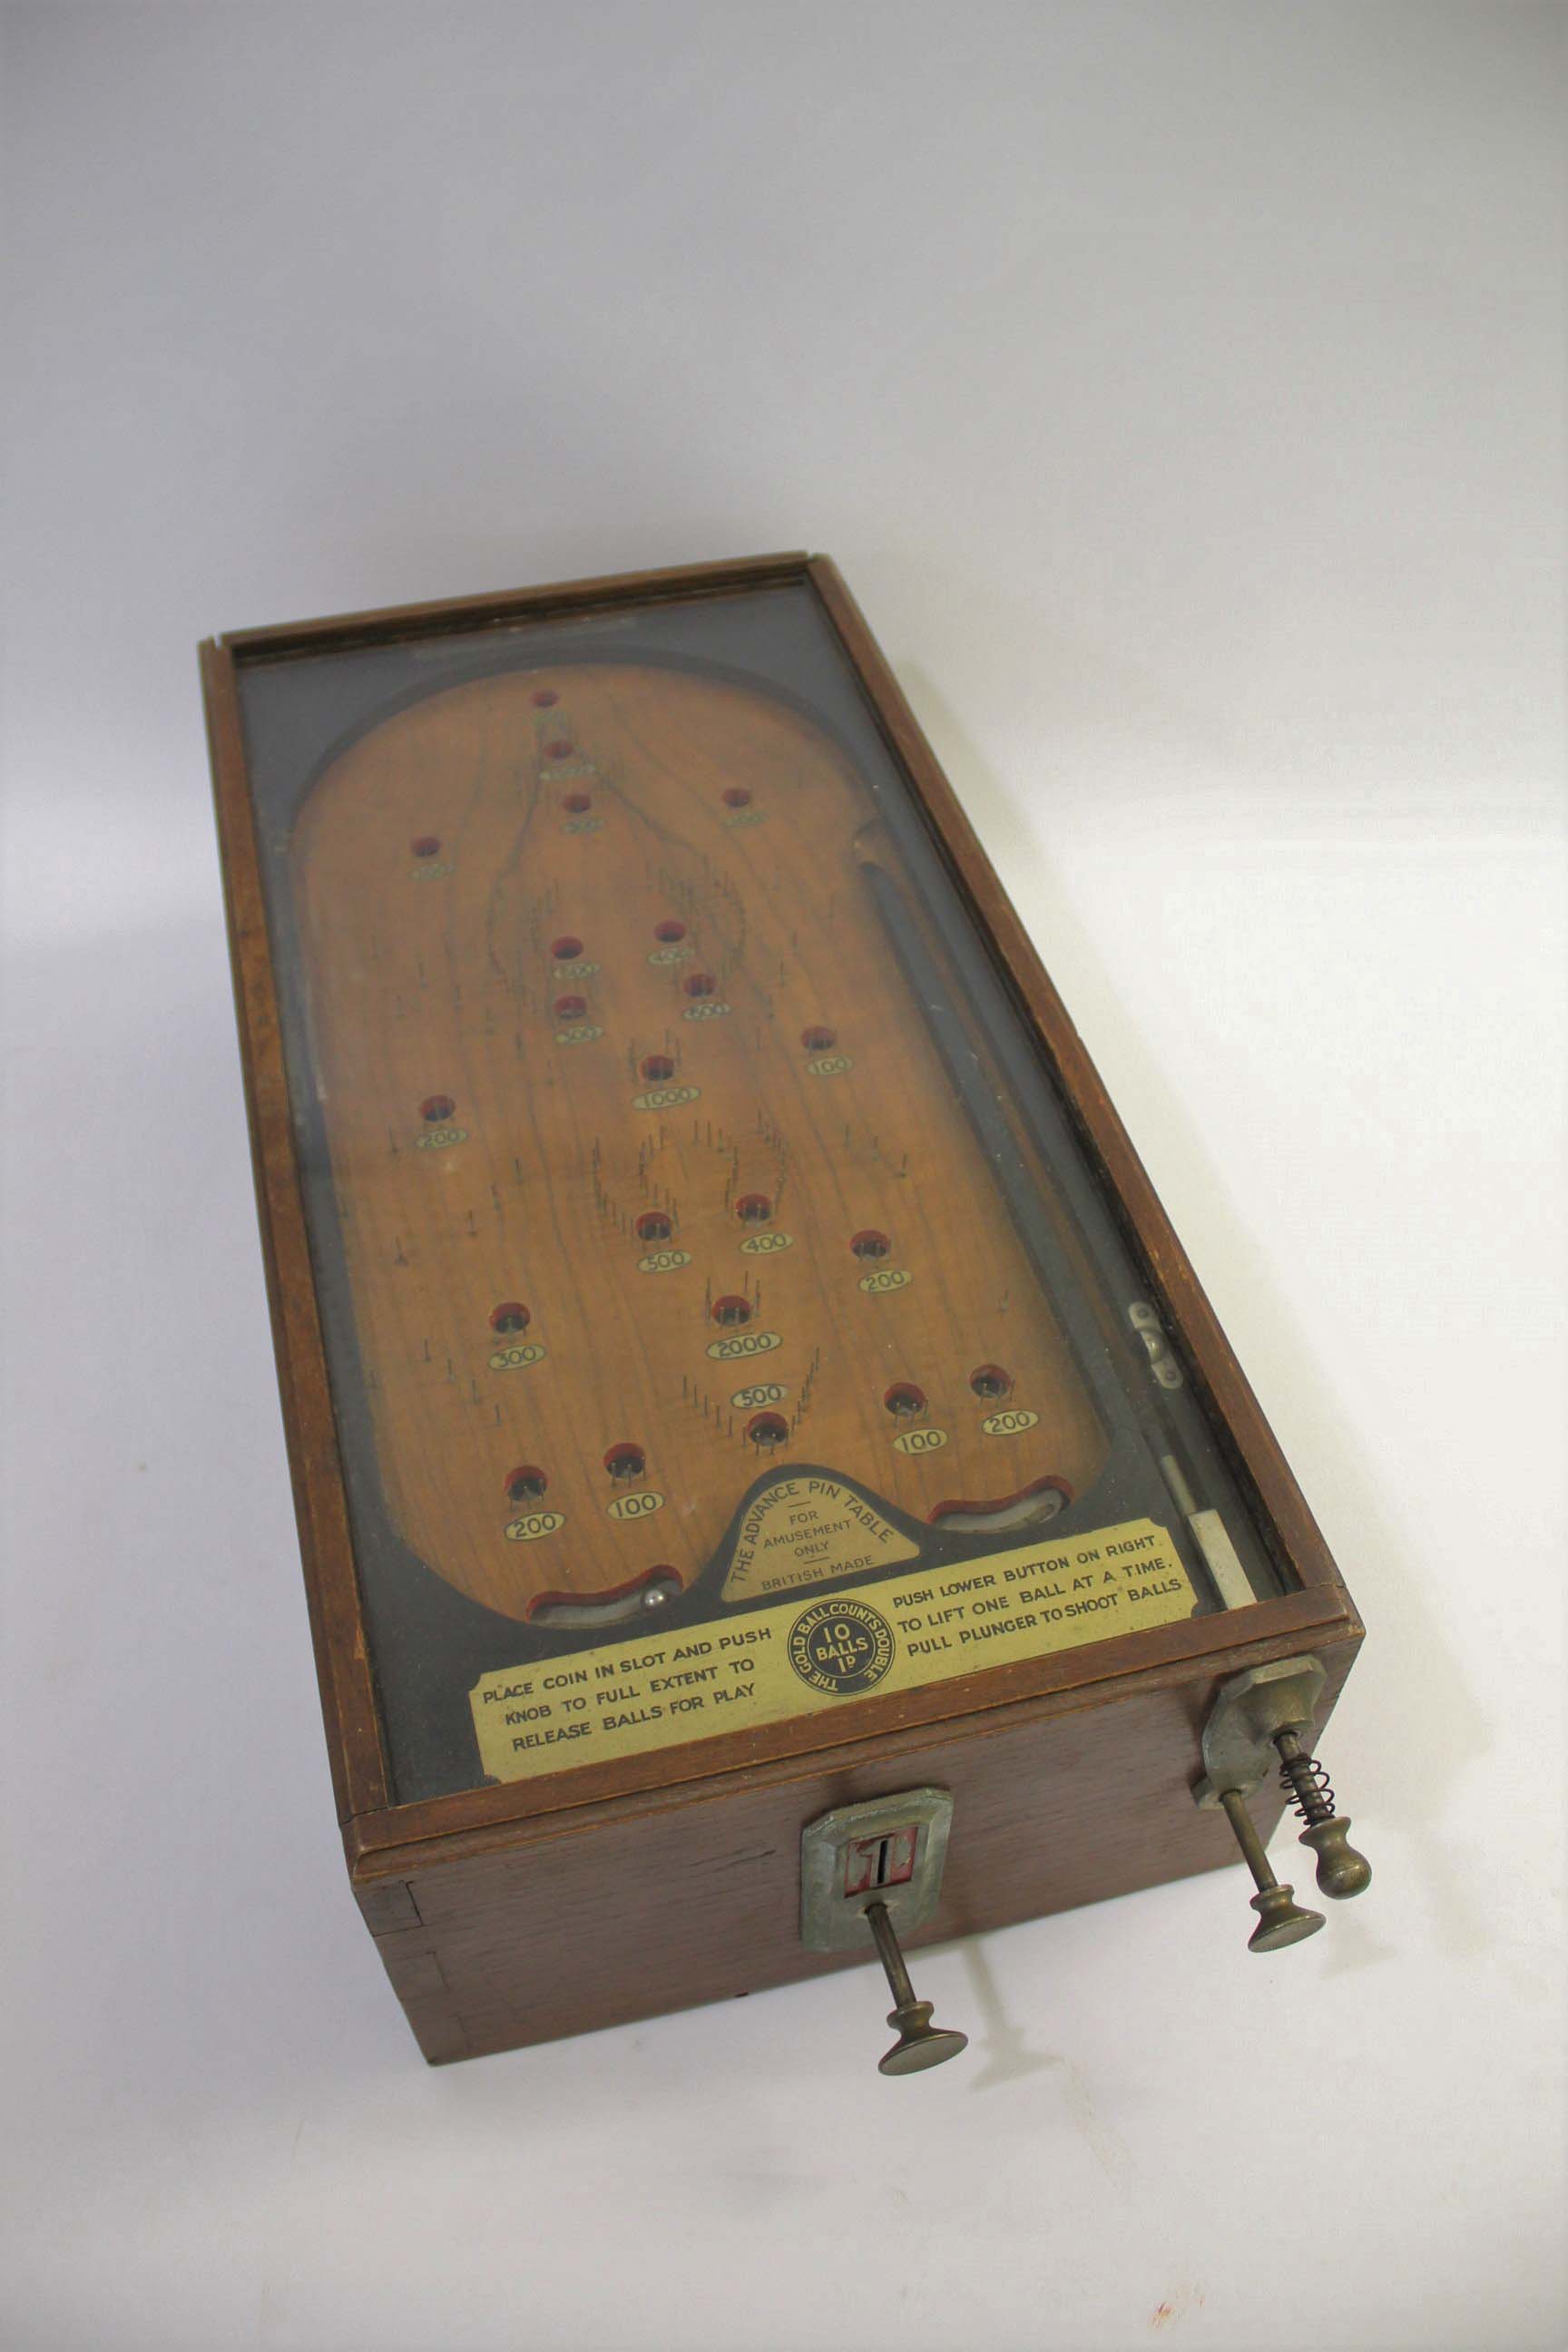 VINTAGE PINBALL GAME - 'THE ADVANCE PIN TABLE' a vintage pinball or bagatelle game The Advance Pin